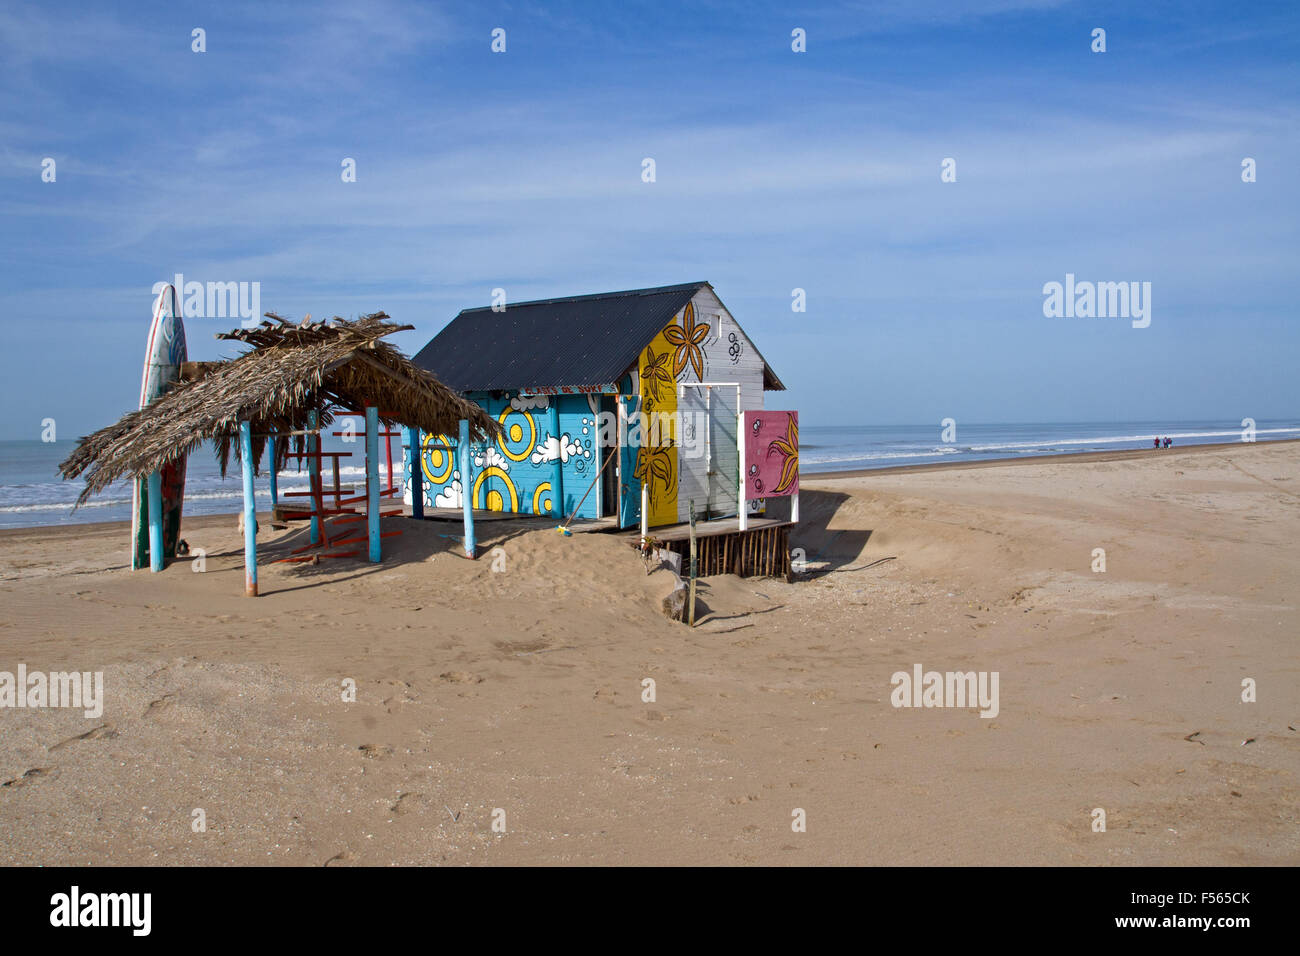 A cabana with a surfboard at the argentinean atlantic coast Stock Photo